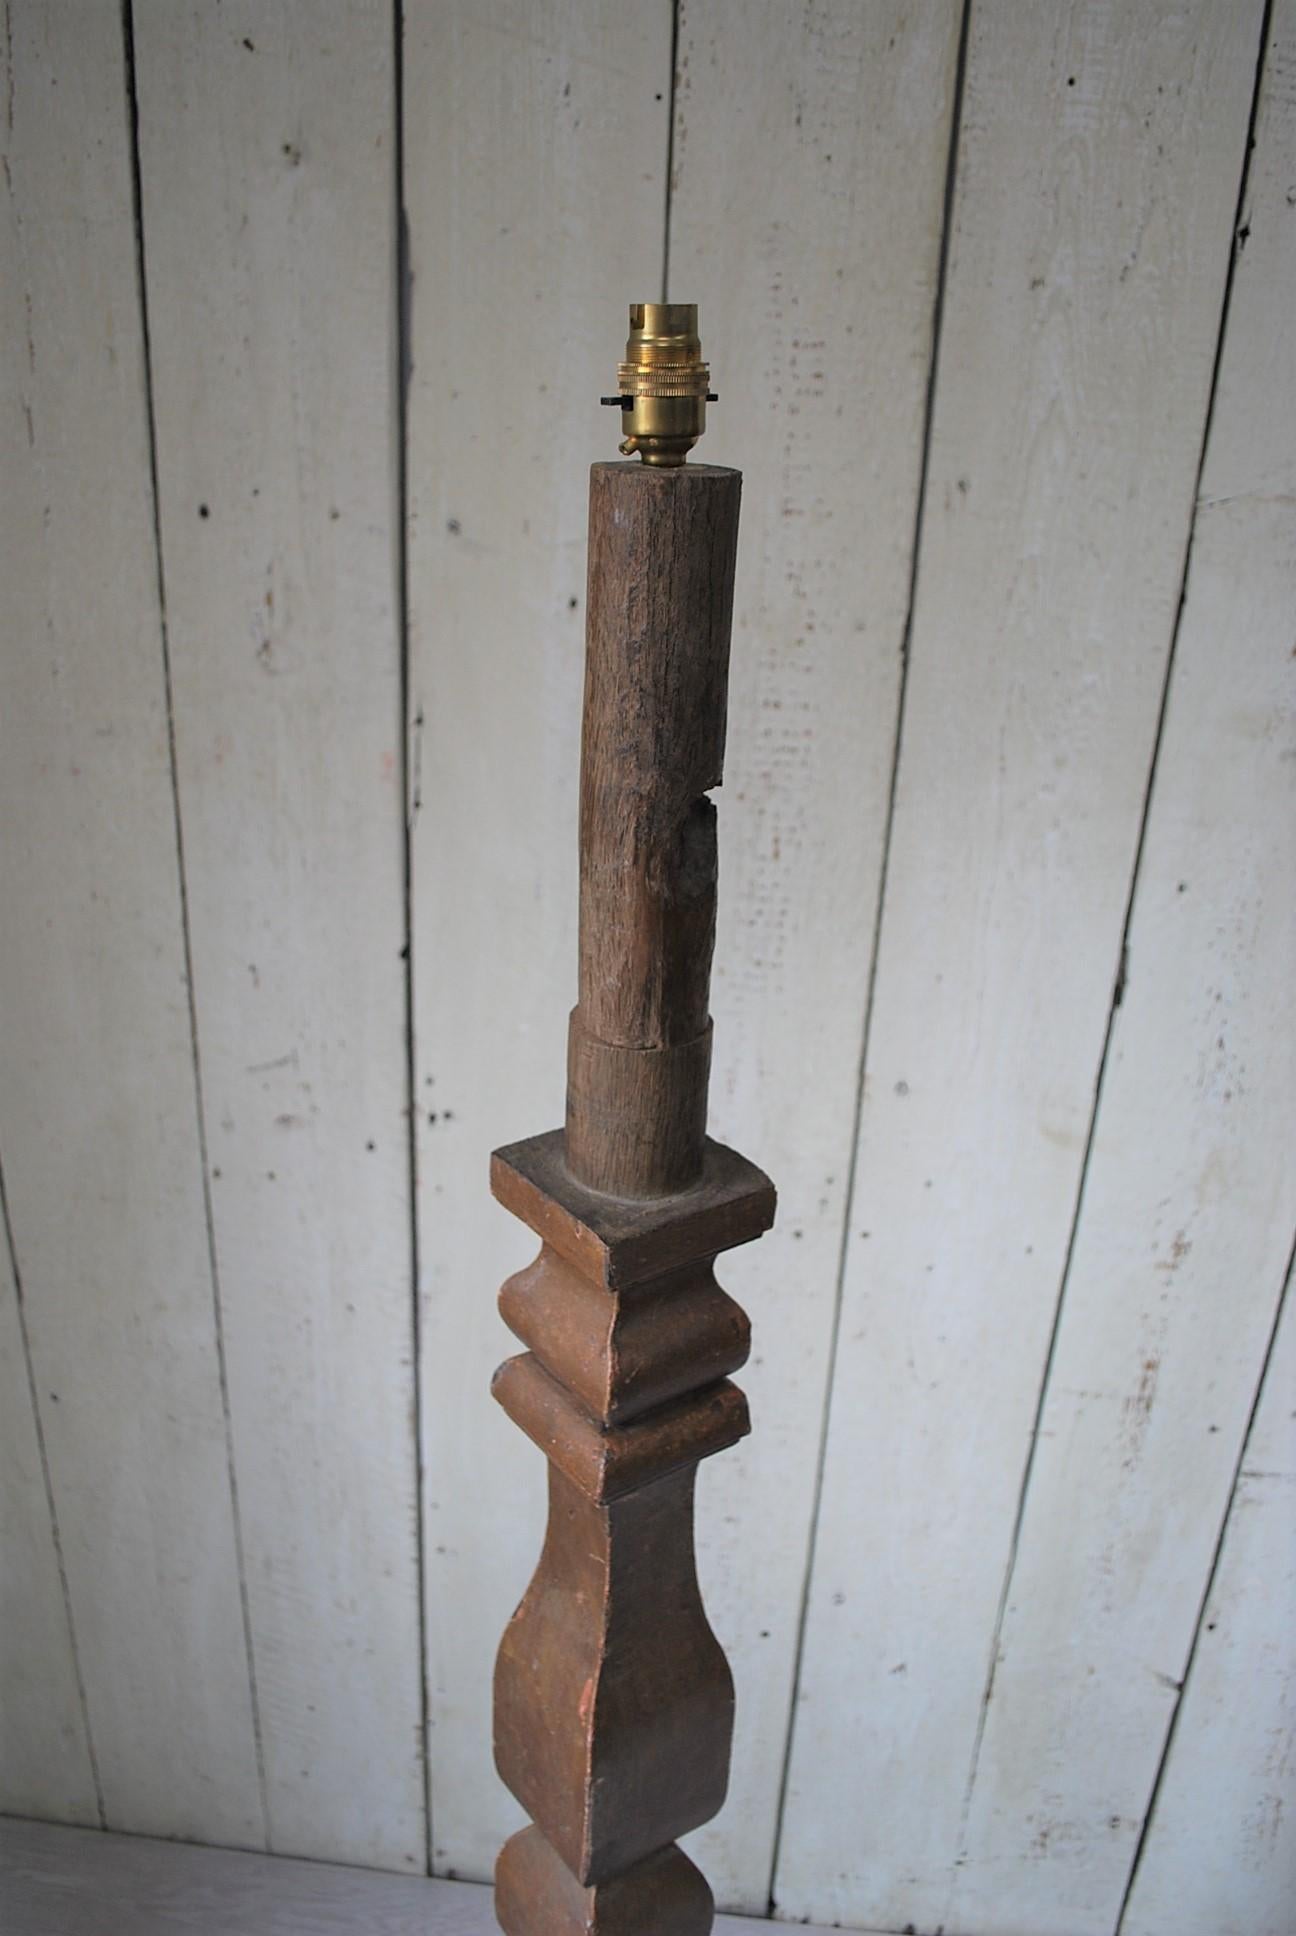 A rare and unusual 17th century antique French standard lamp converted to electric. Standing on a stepped triangular base with a square baluster column. Still retaining its original scumble paint on top of solid oak. Very sturdy and has now been